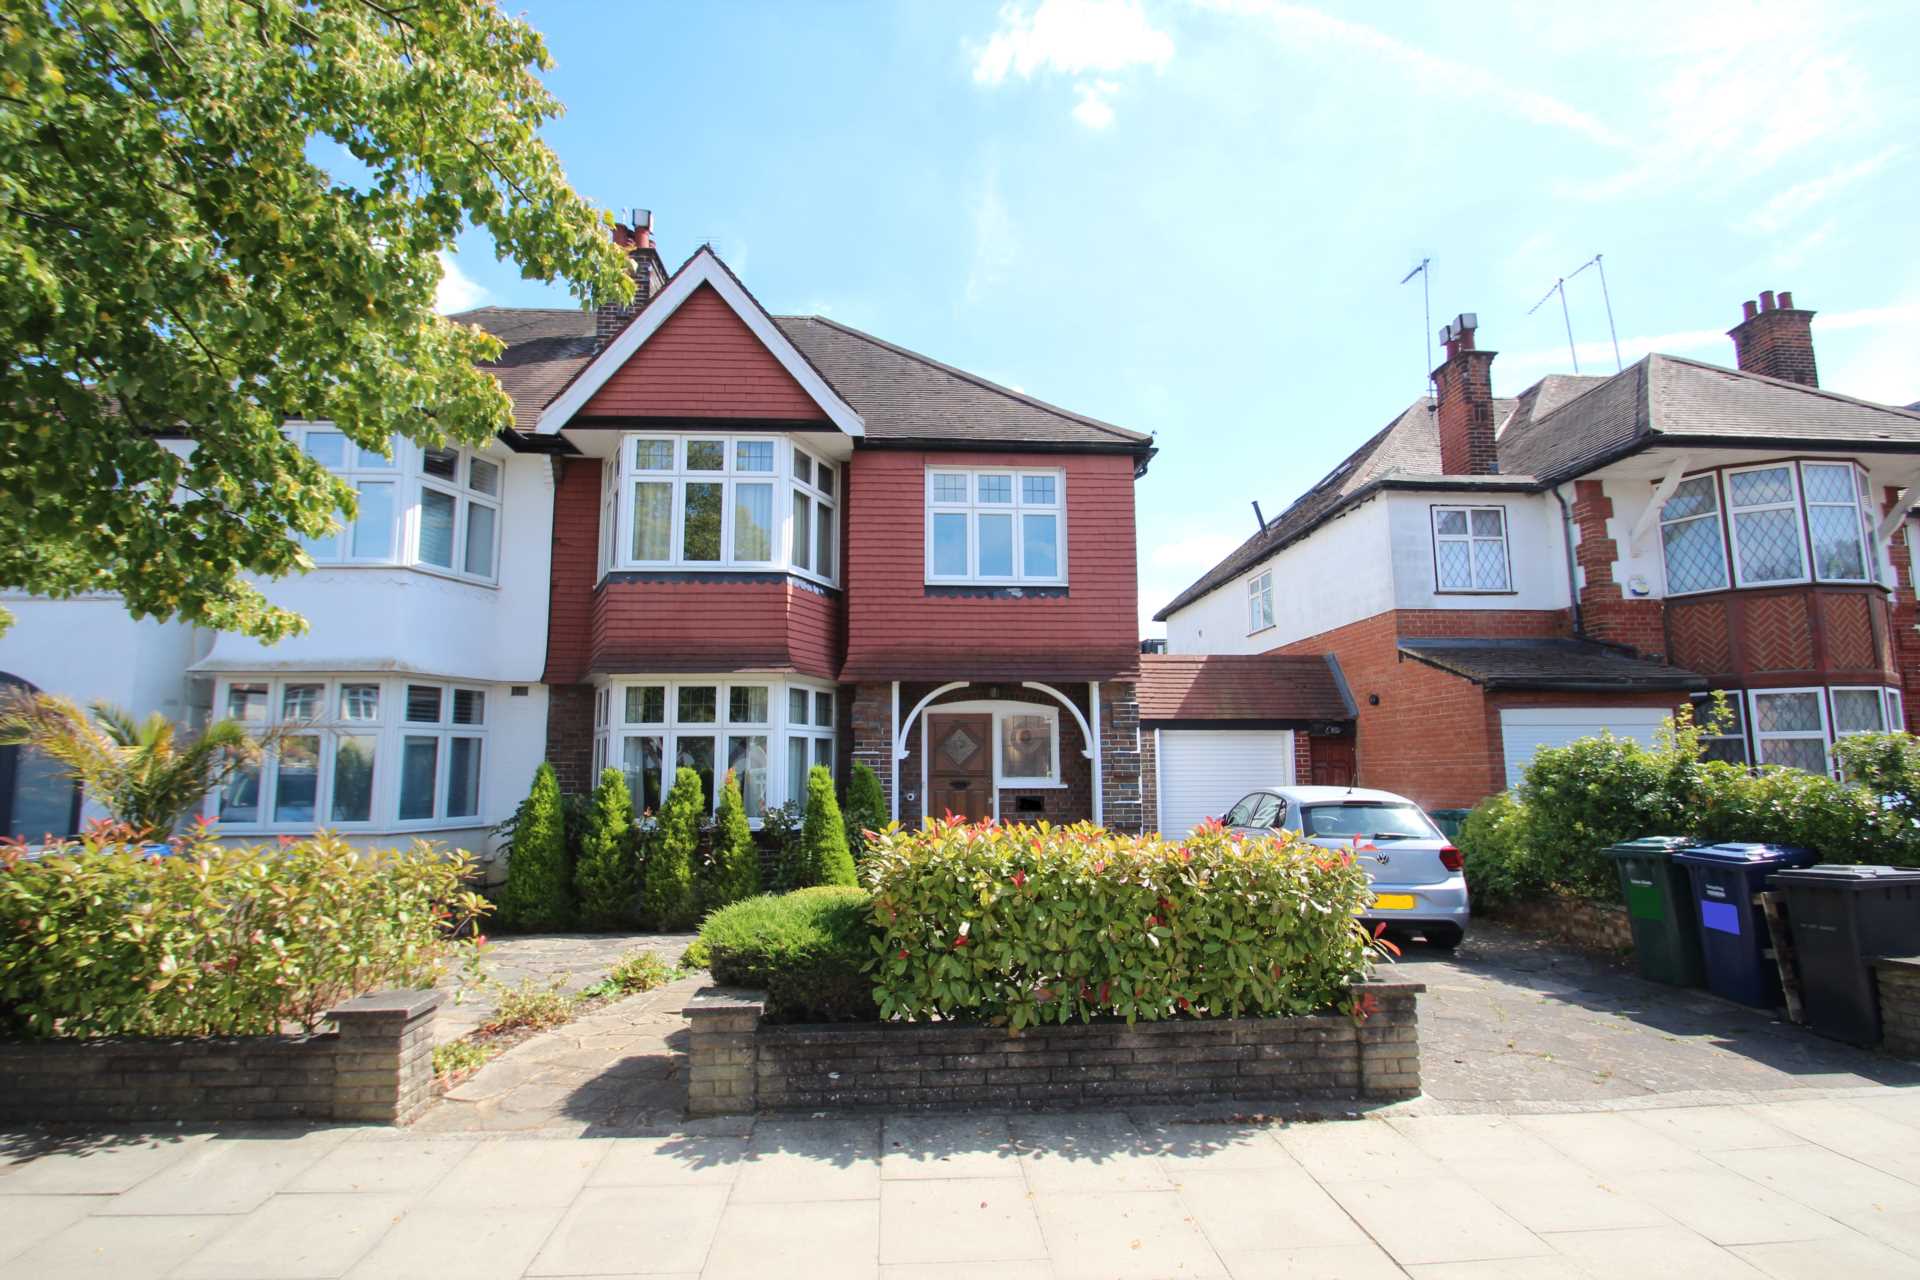 Creighton Avenue, East Finchley, Image 1